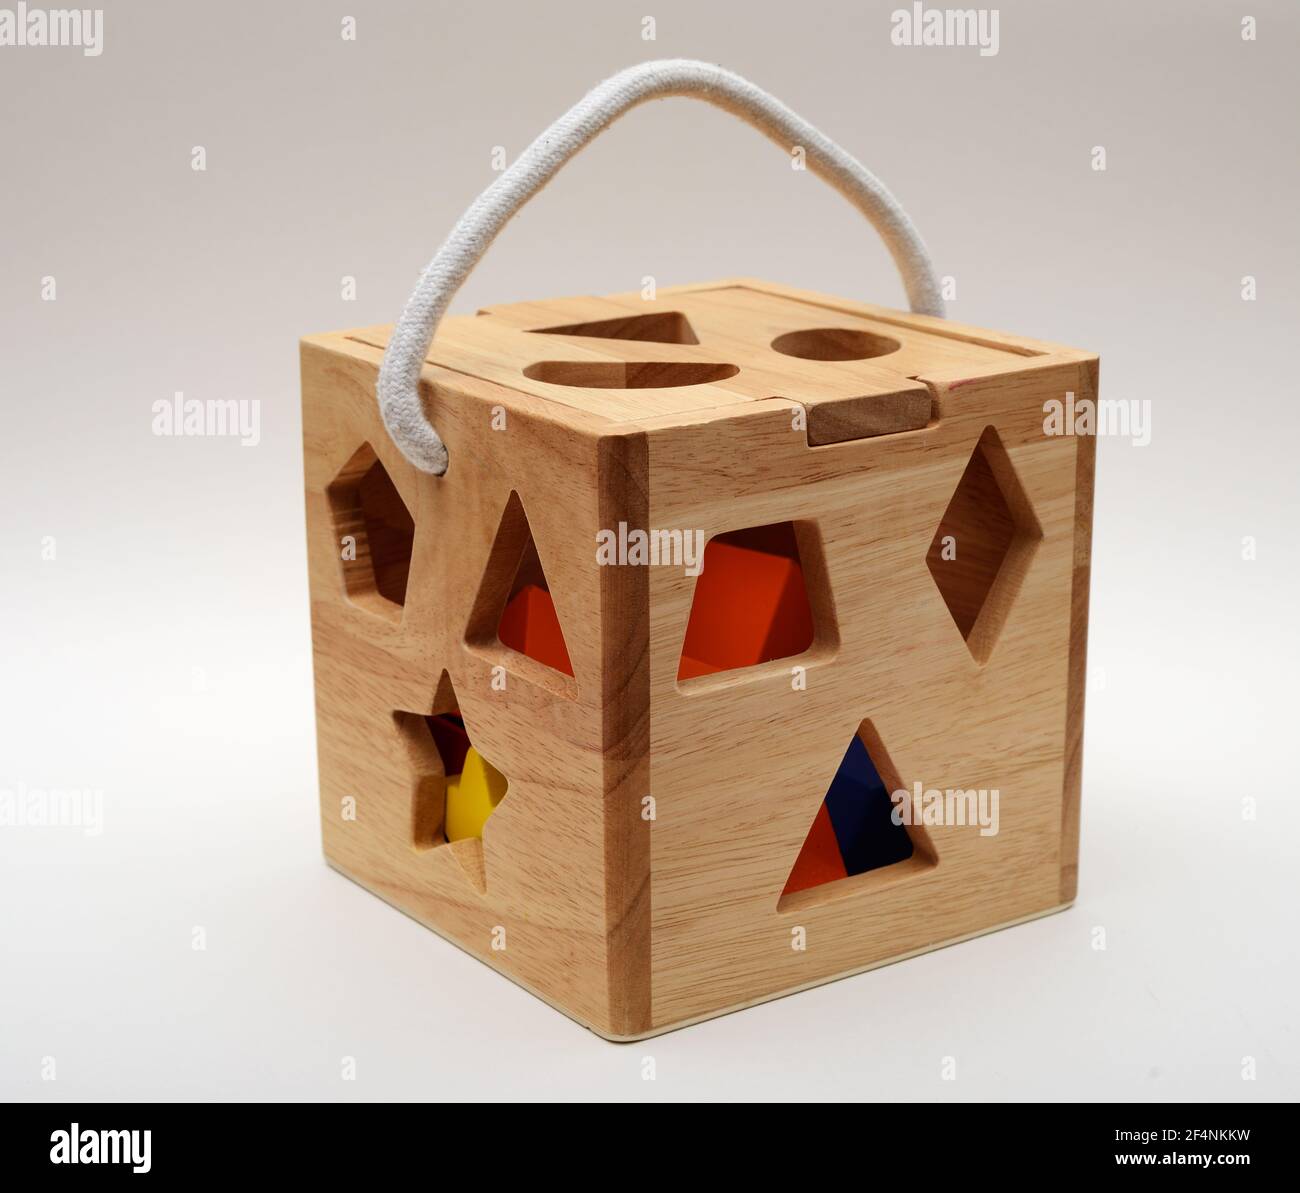 eco friendly wooden toys on a neutral background Stock Photo